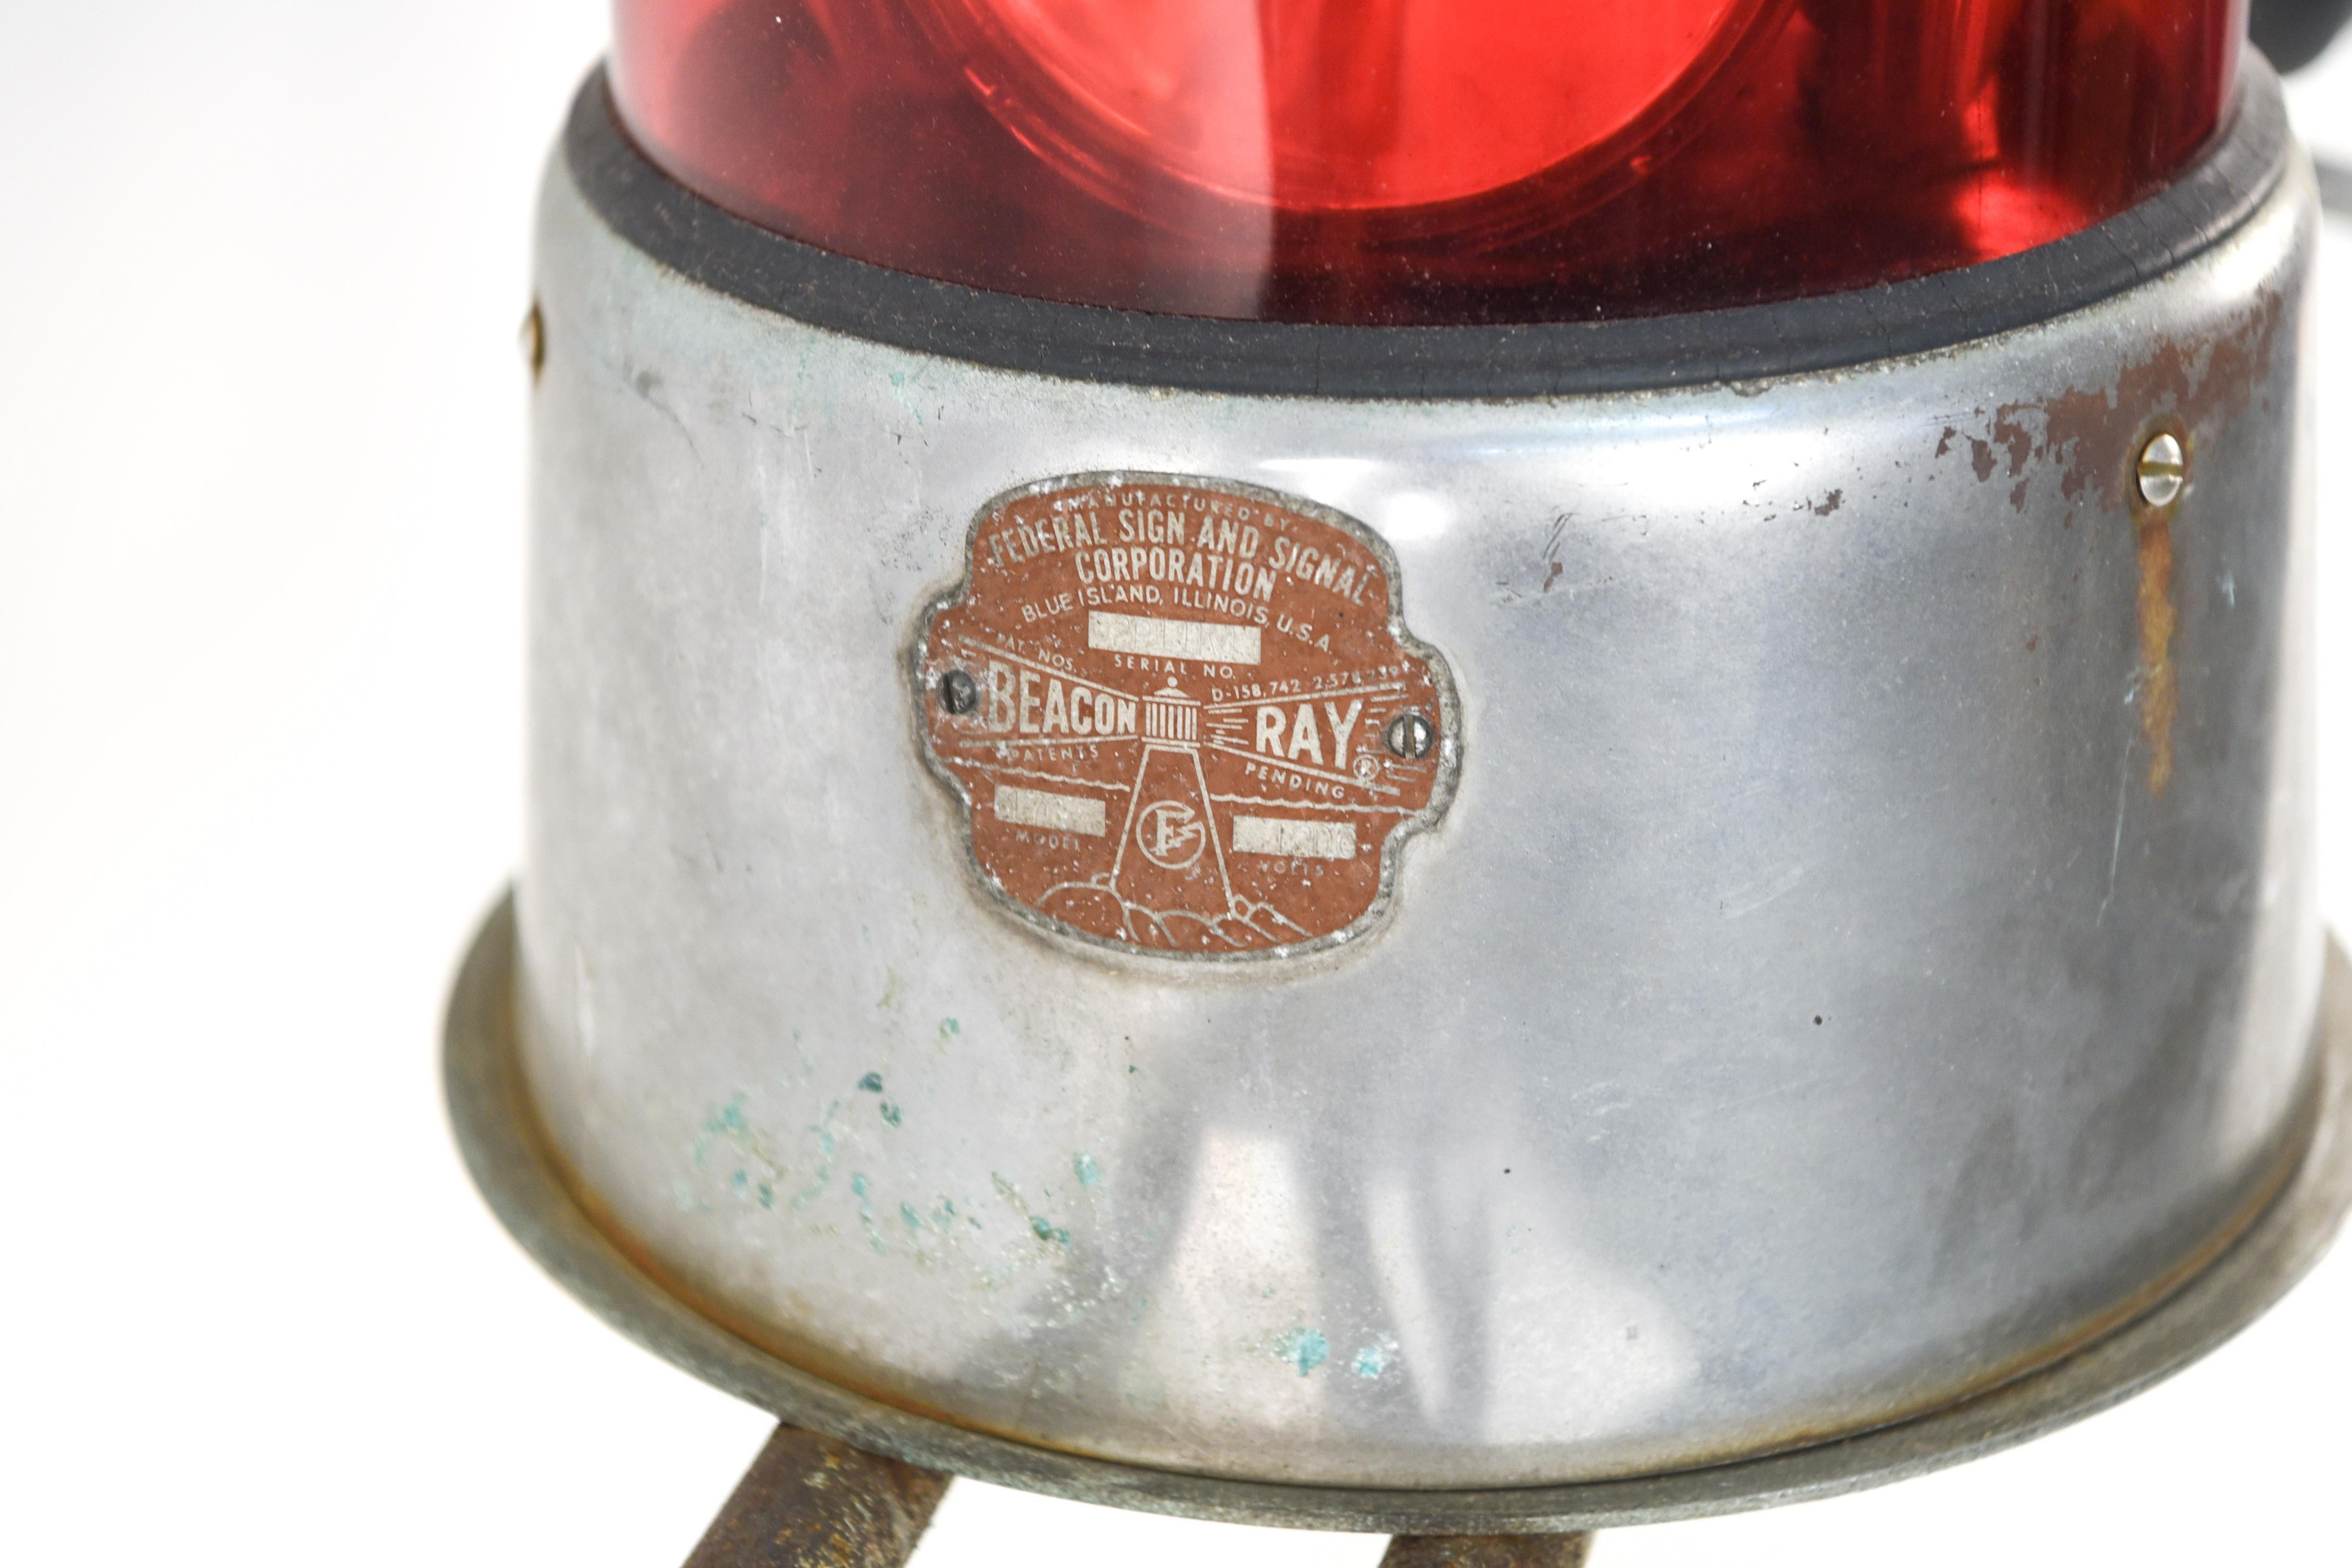 This vintage police siren and lights attachment would be a great movie prop or eye-catching decorative piece. Although not tested for functionality, this piece can stand alone as a piece of historical memorabilia that will provide an element of